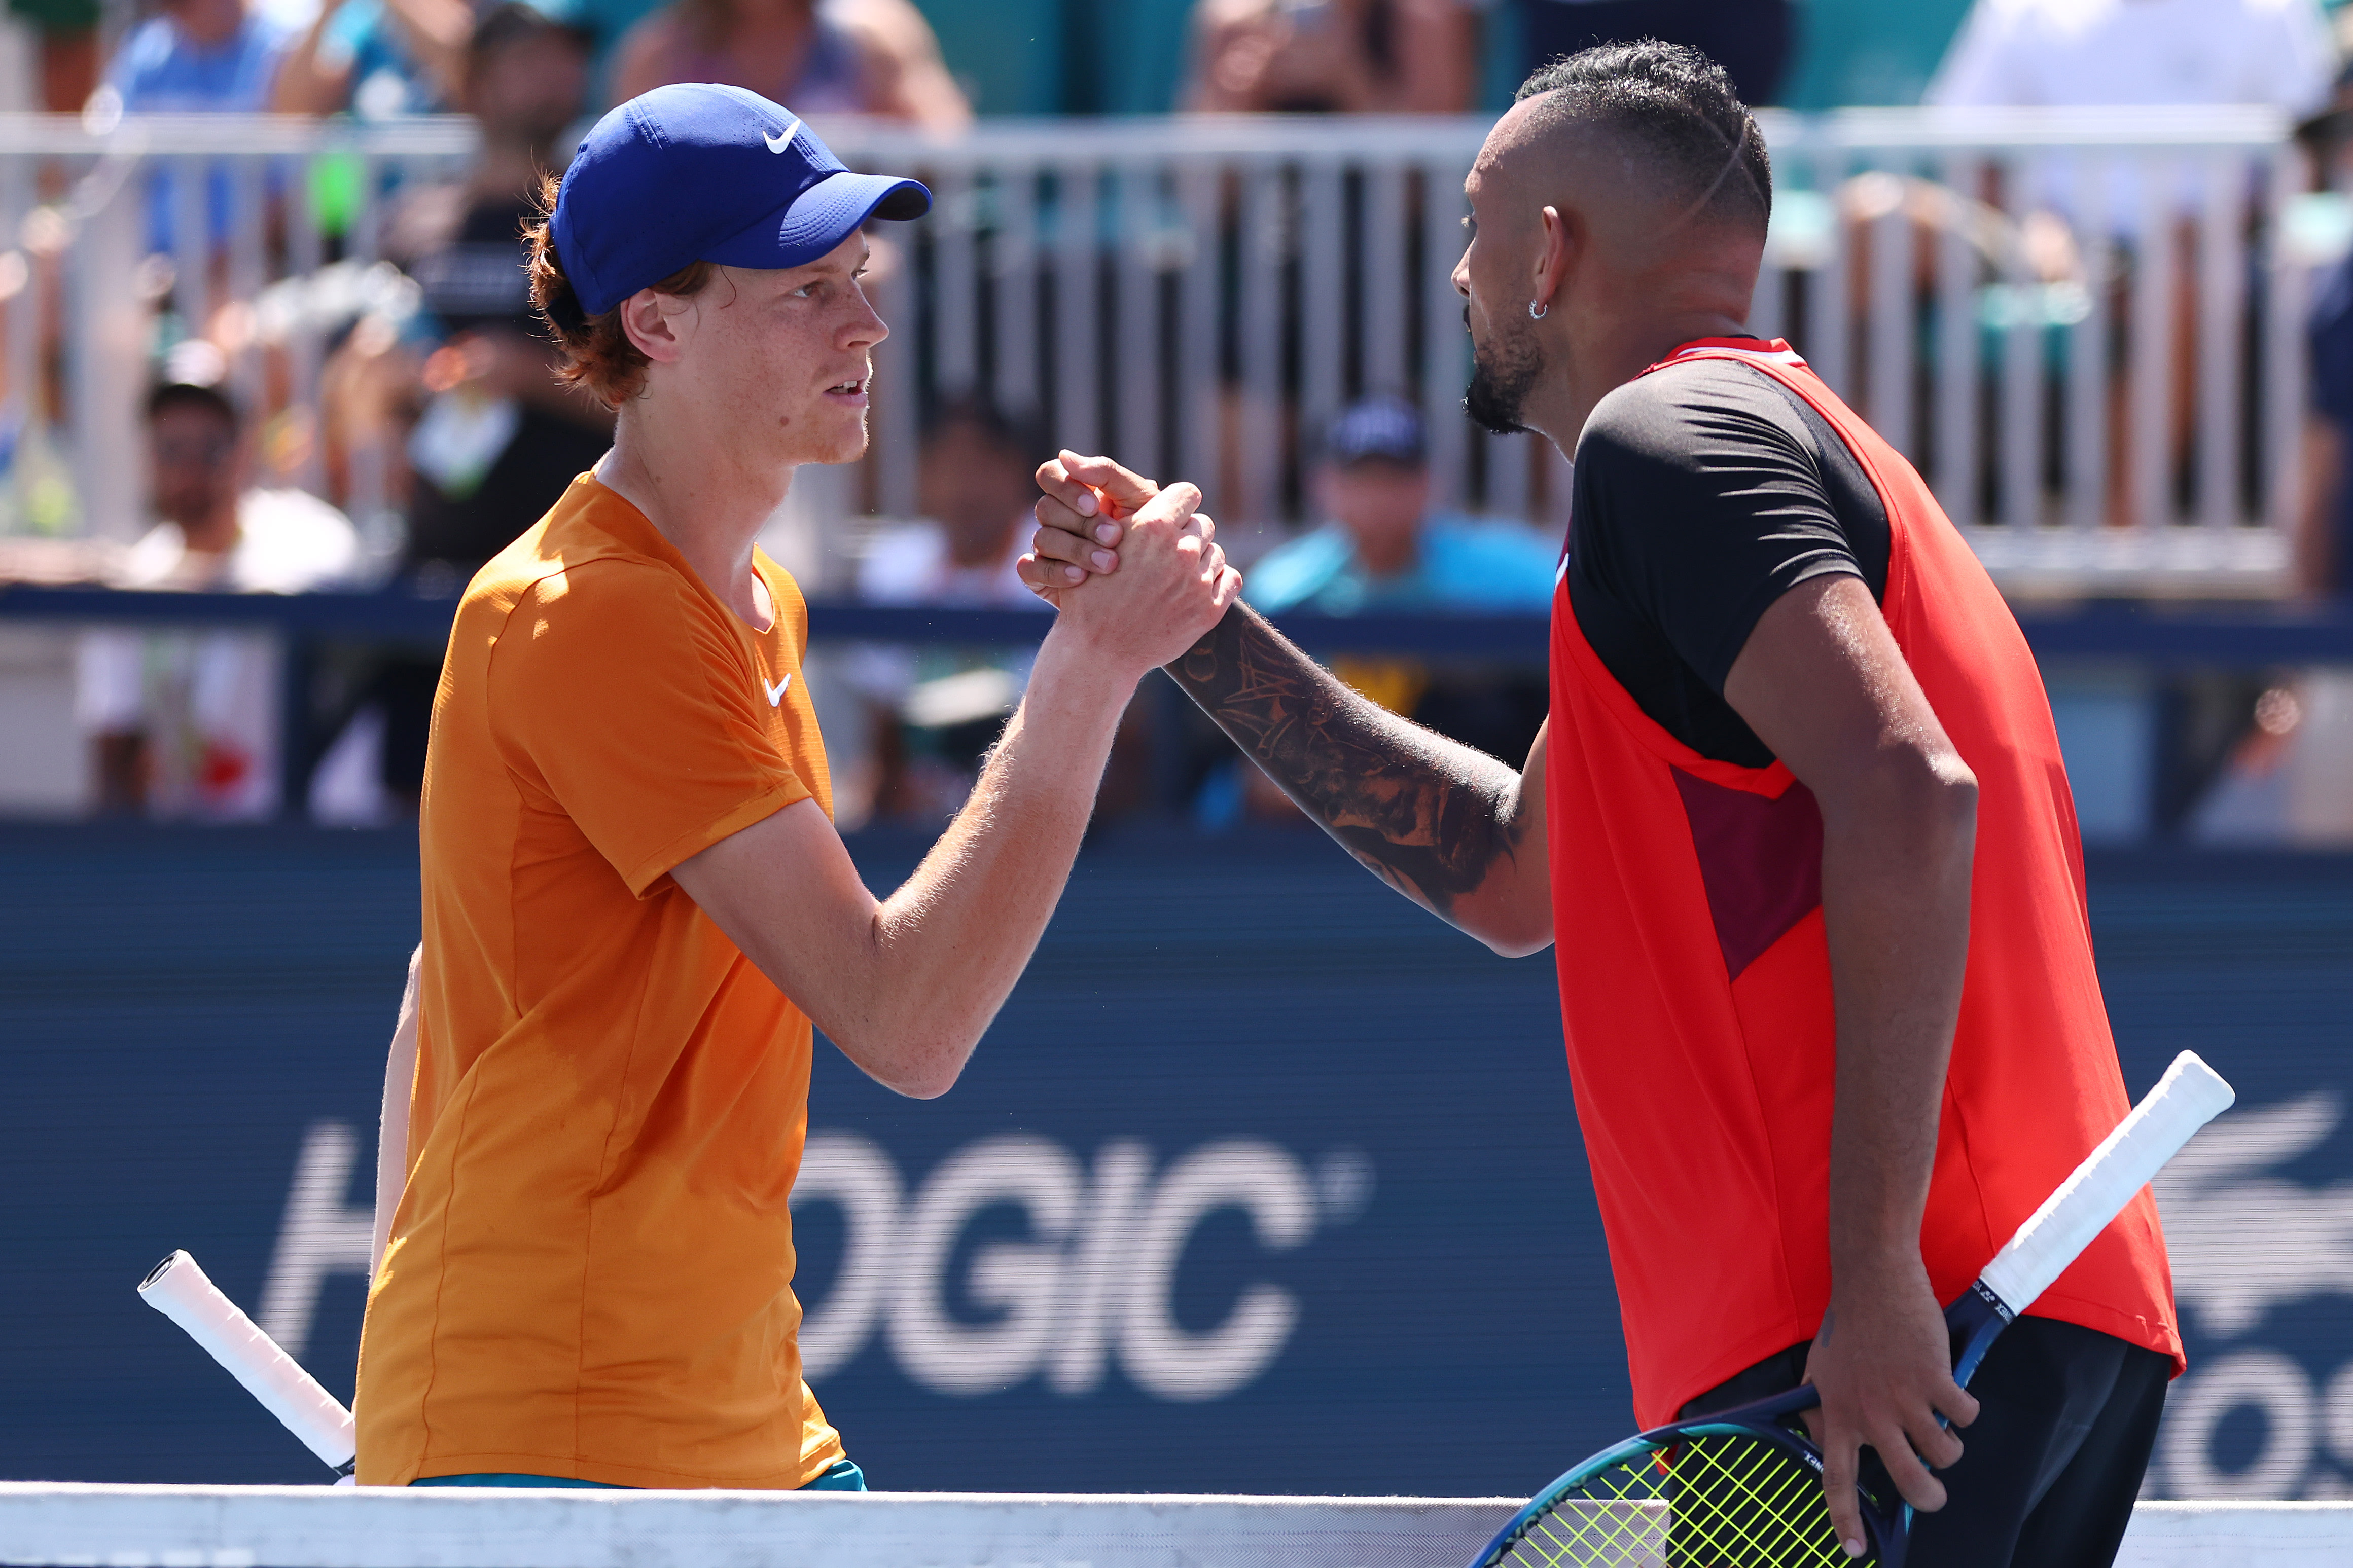 Jannik Sinner weathers Kyrgios storm to advance in spite of Miami circus